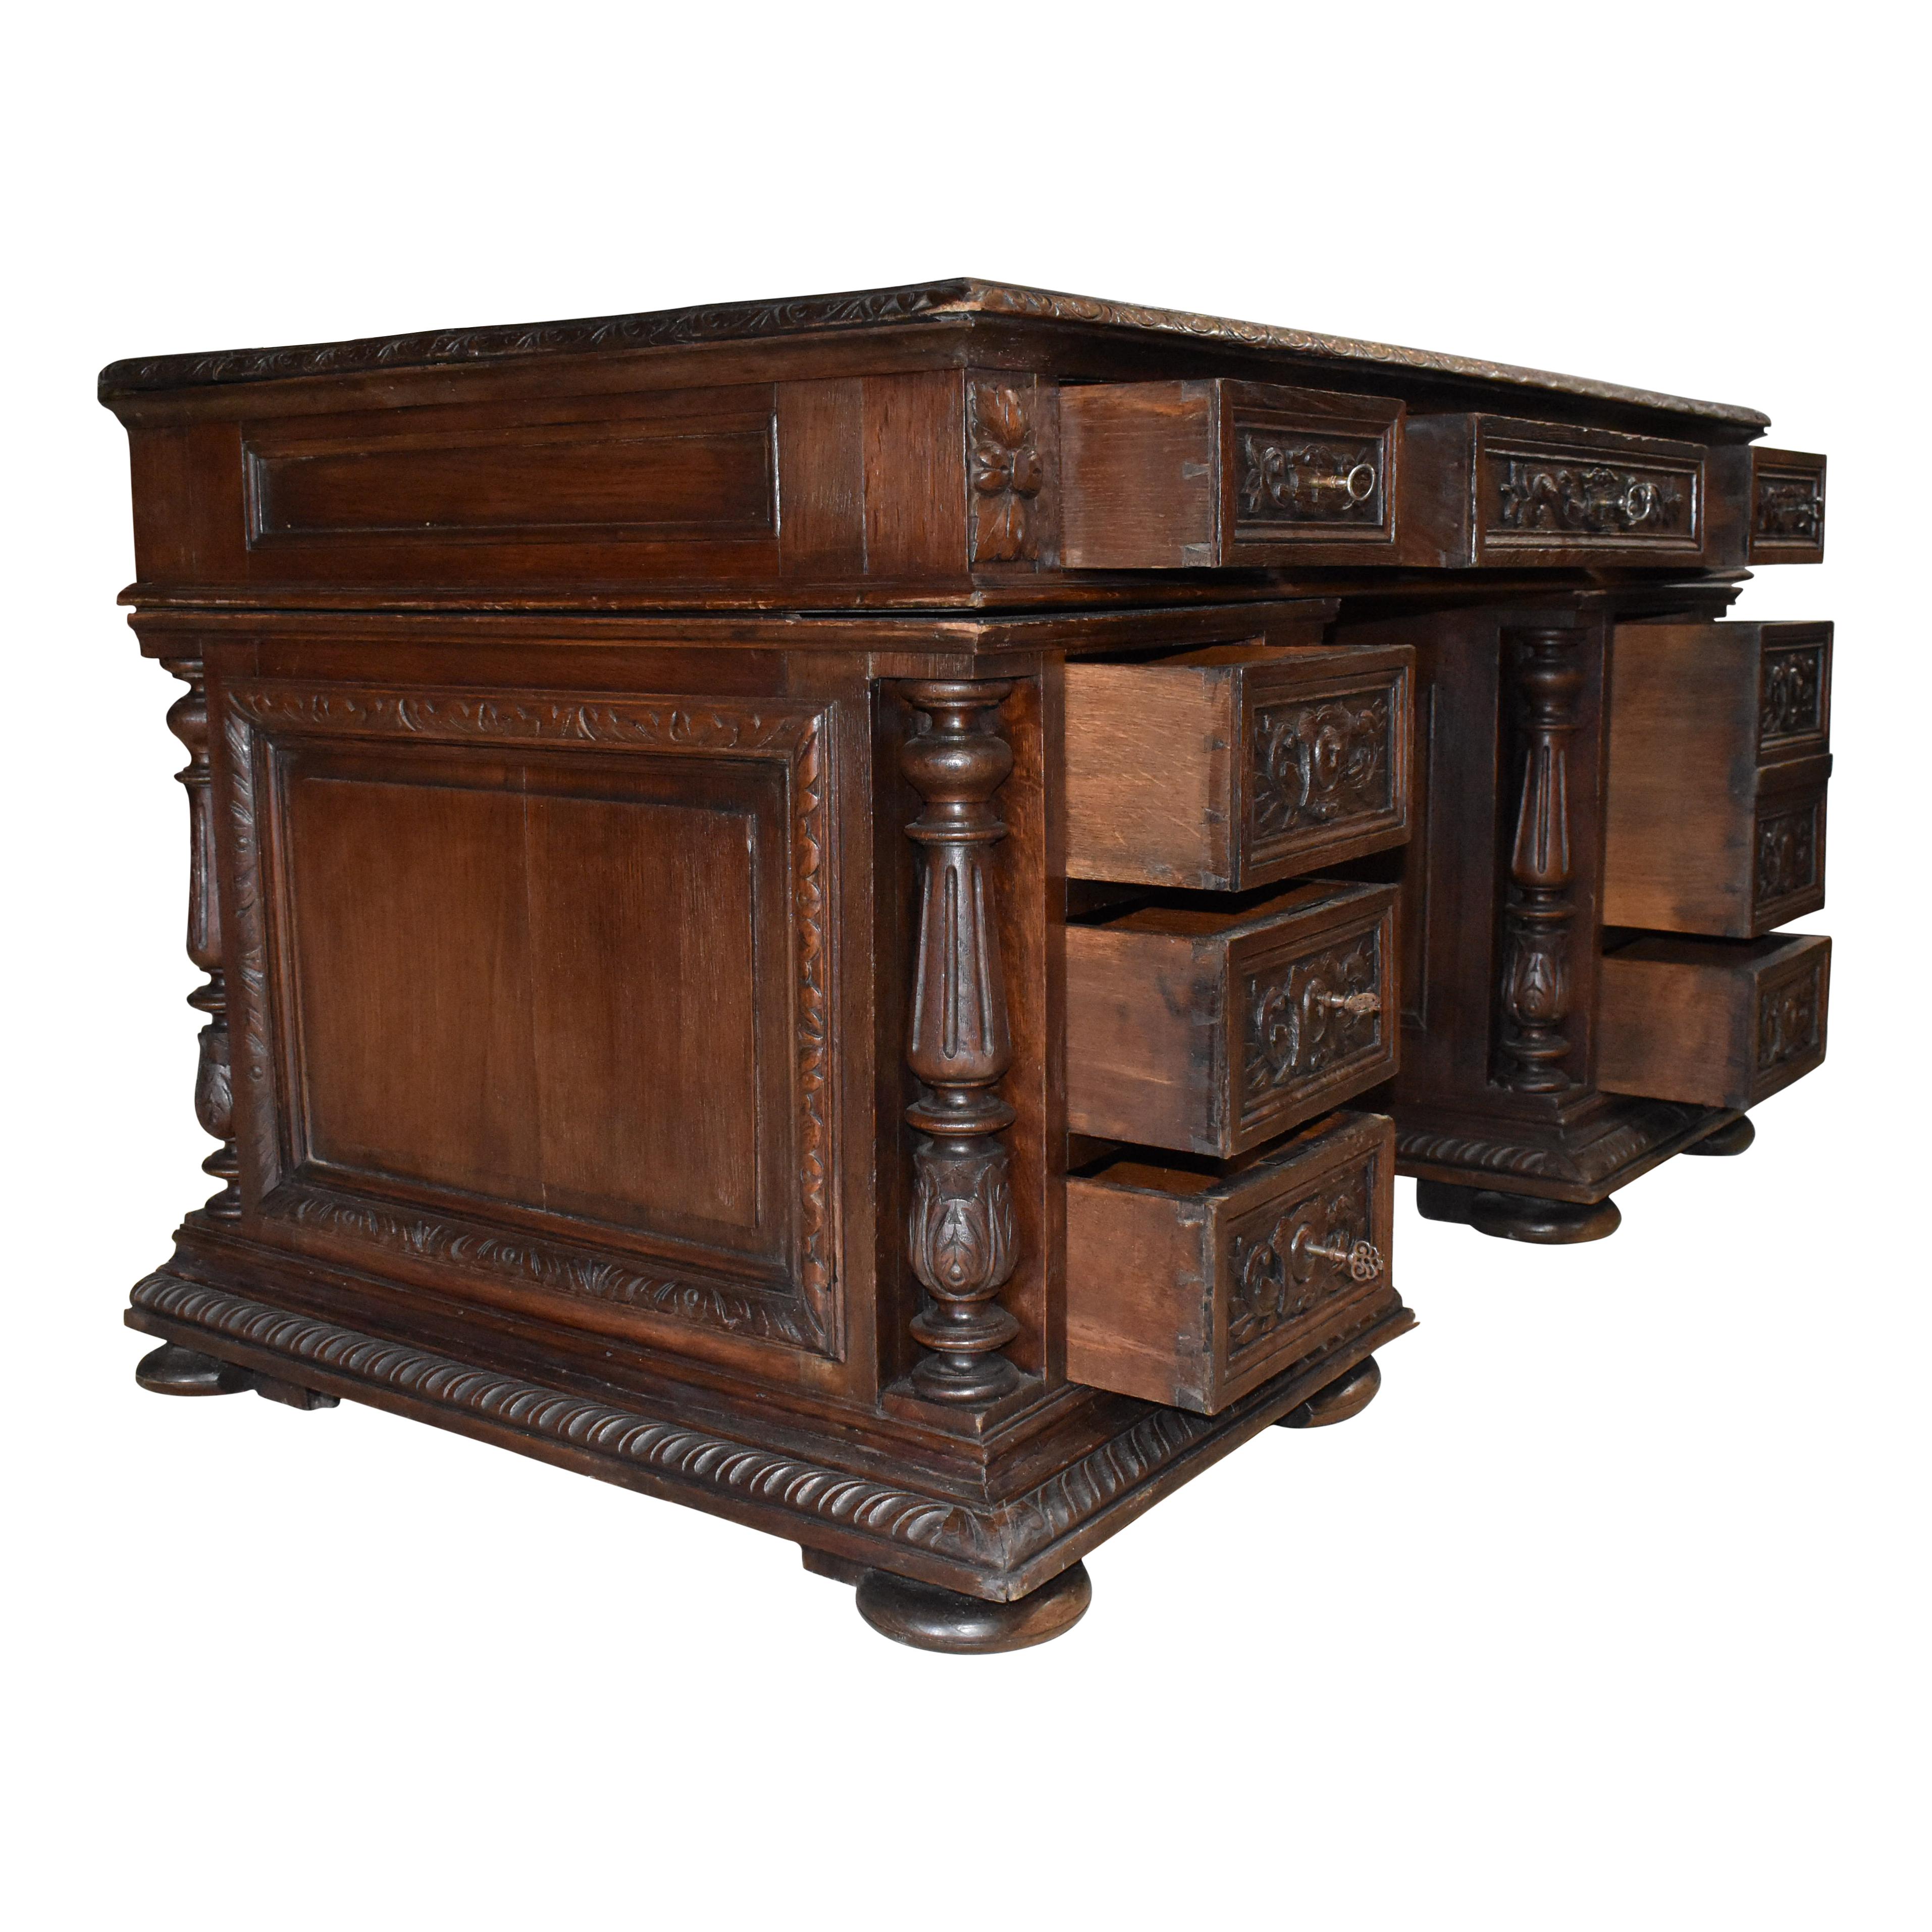 This handsome English desk was created in the late-19th century from European oak and finished with a dark, rich stain. It showcases a rectangular top over a single drawer that is flanked by two smaller side drawers, resting on rectangular